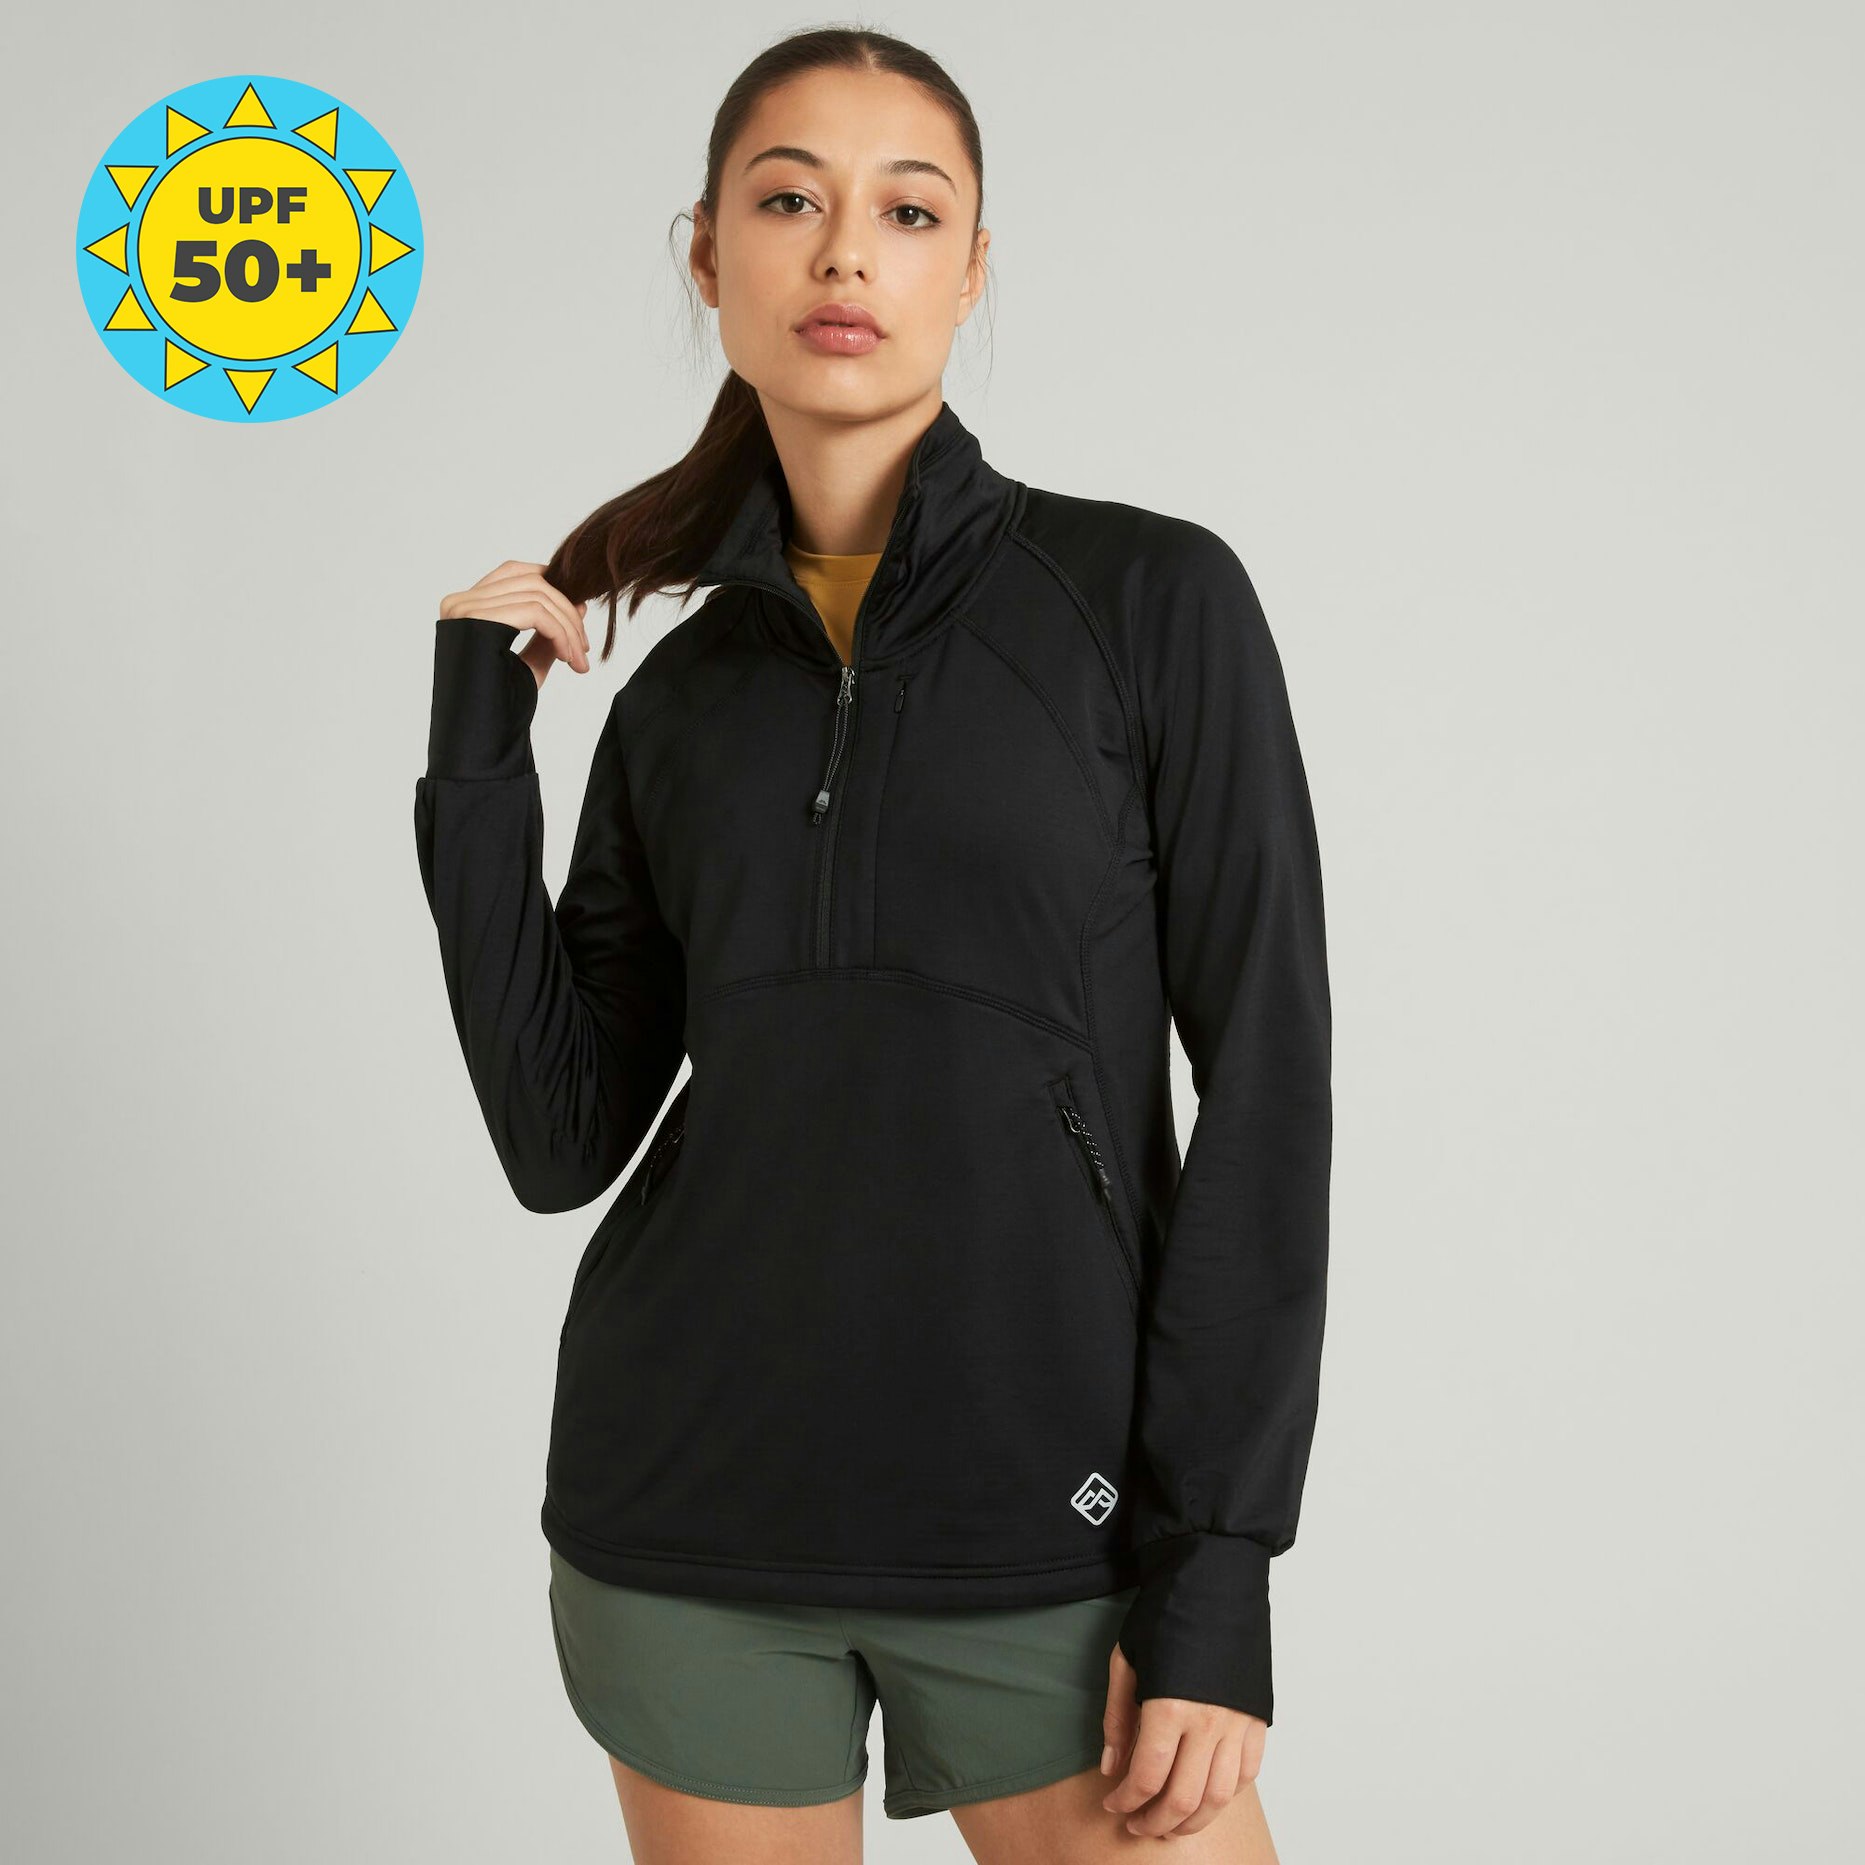 Buy Women's Clearance Outdoor Clothing & Shoes